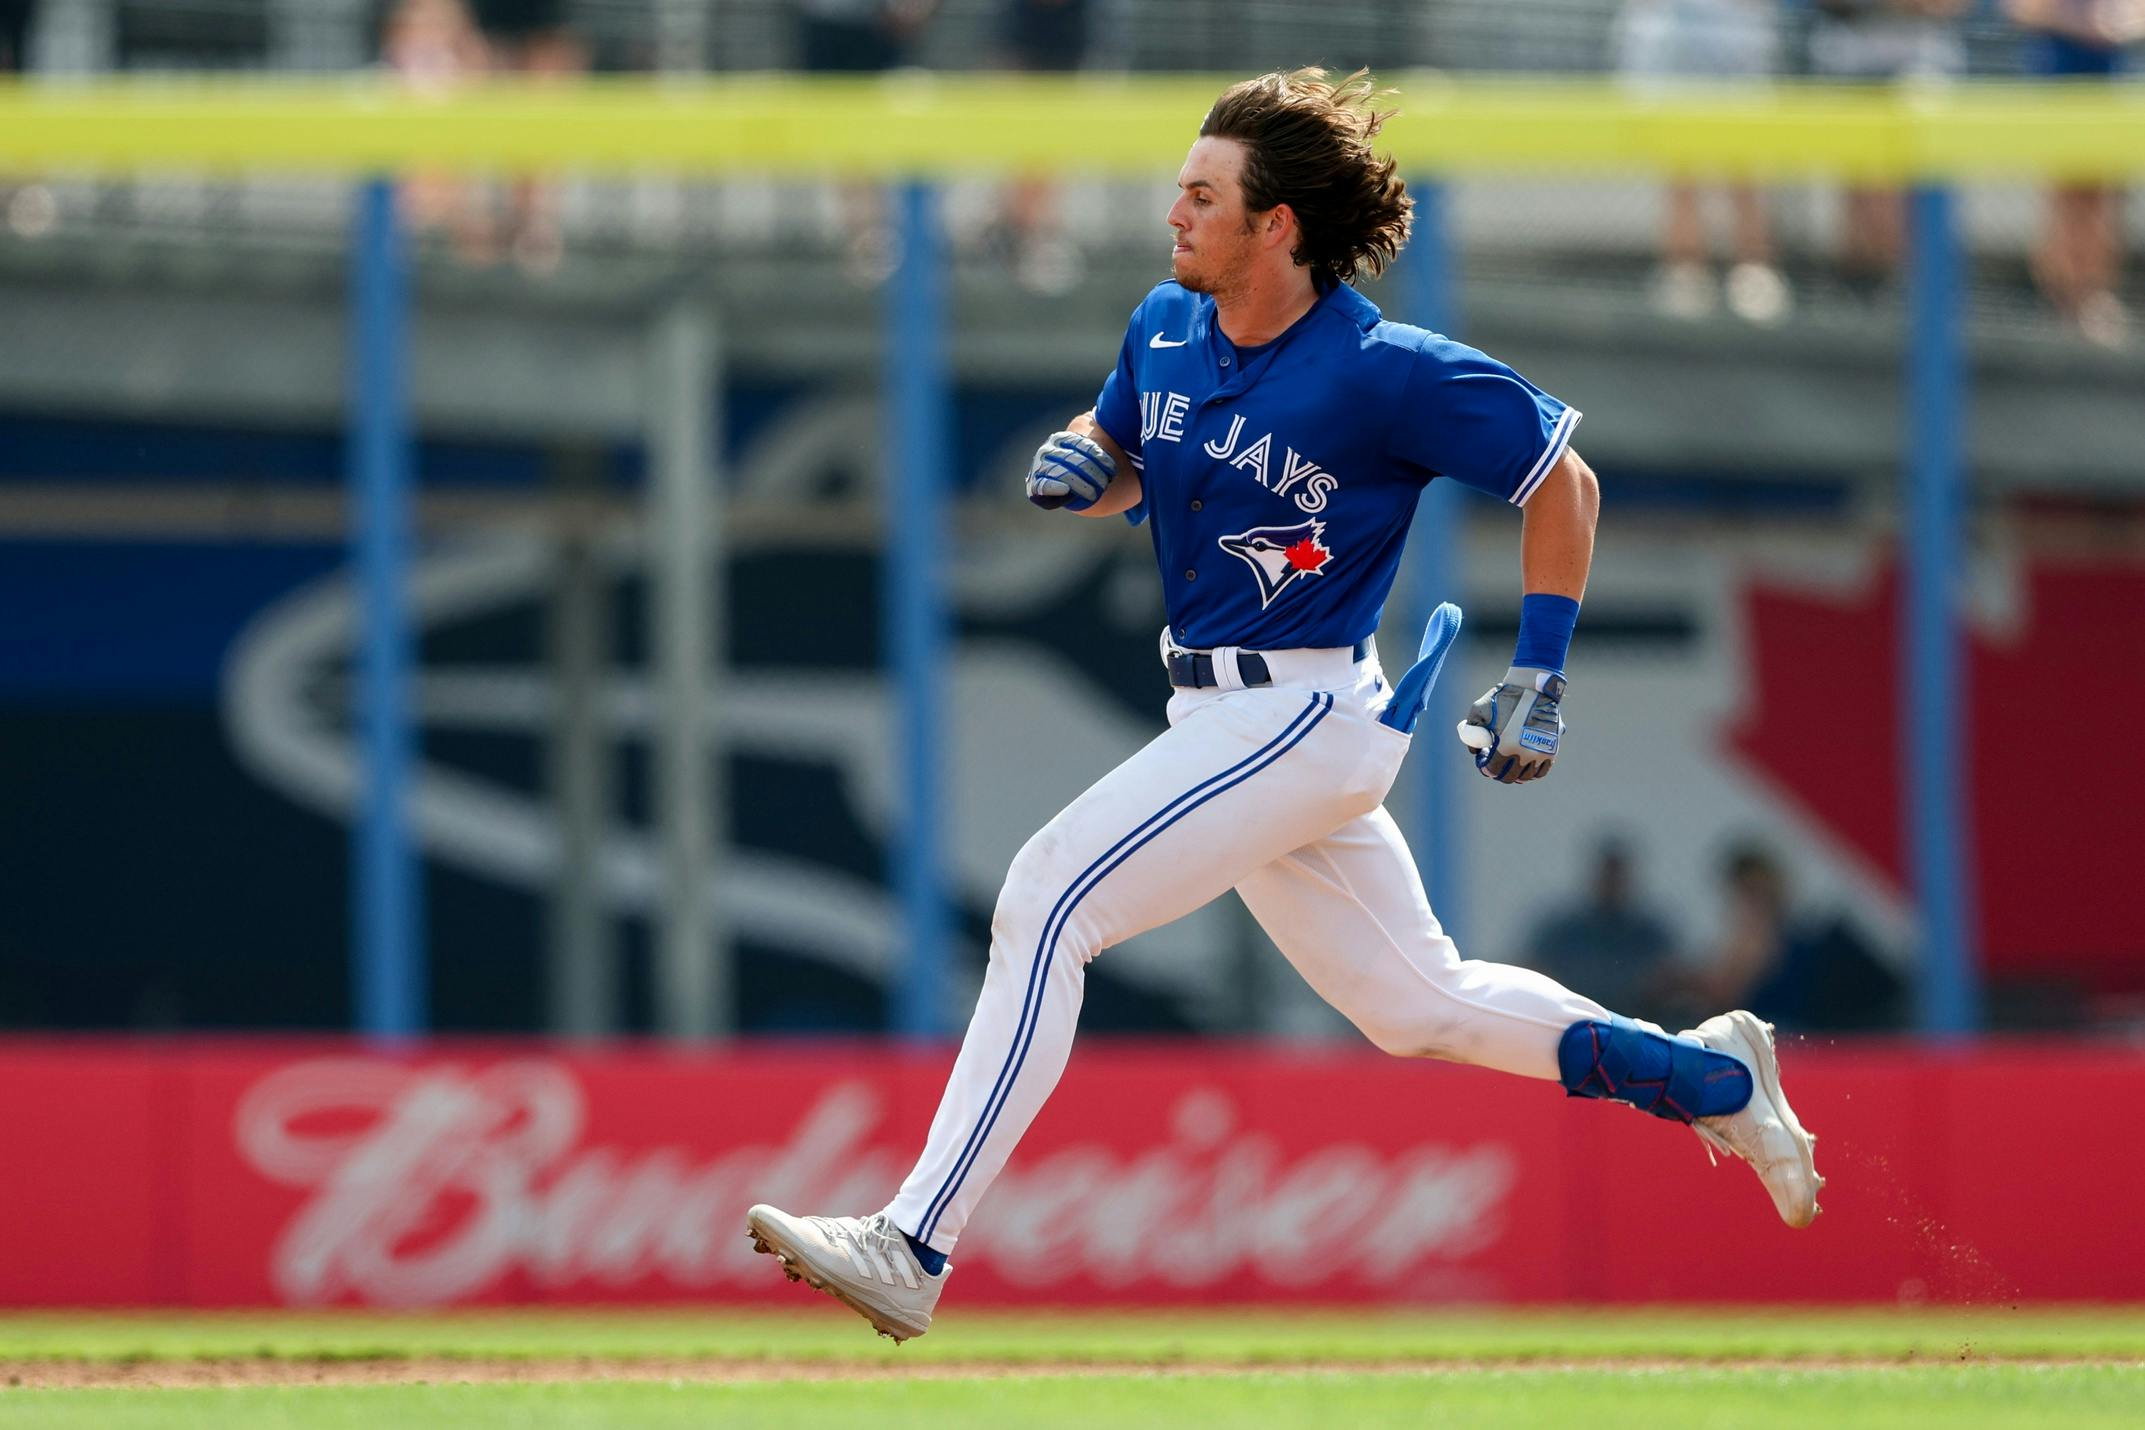 The Blue Jays announce they've cut 11 players, including Addison